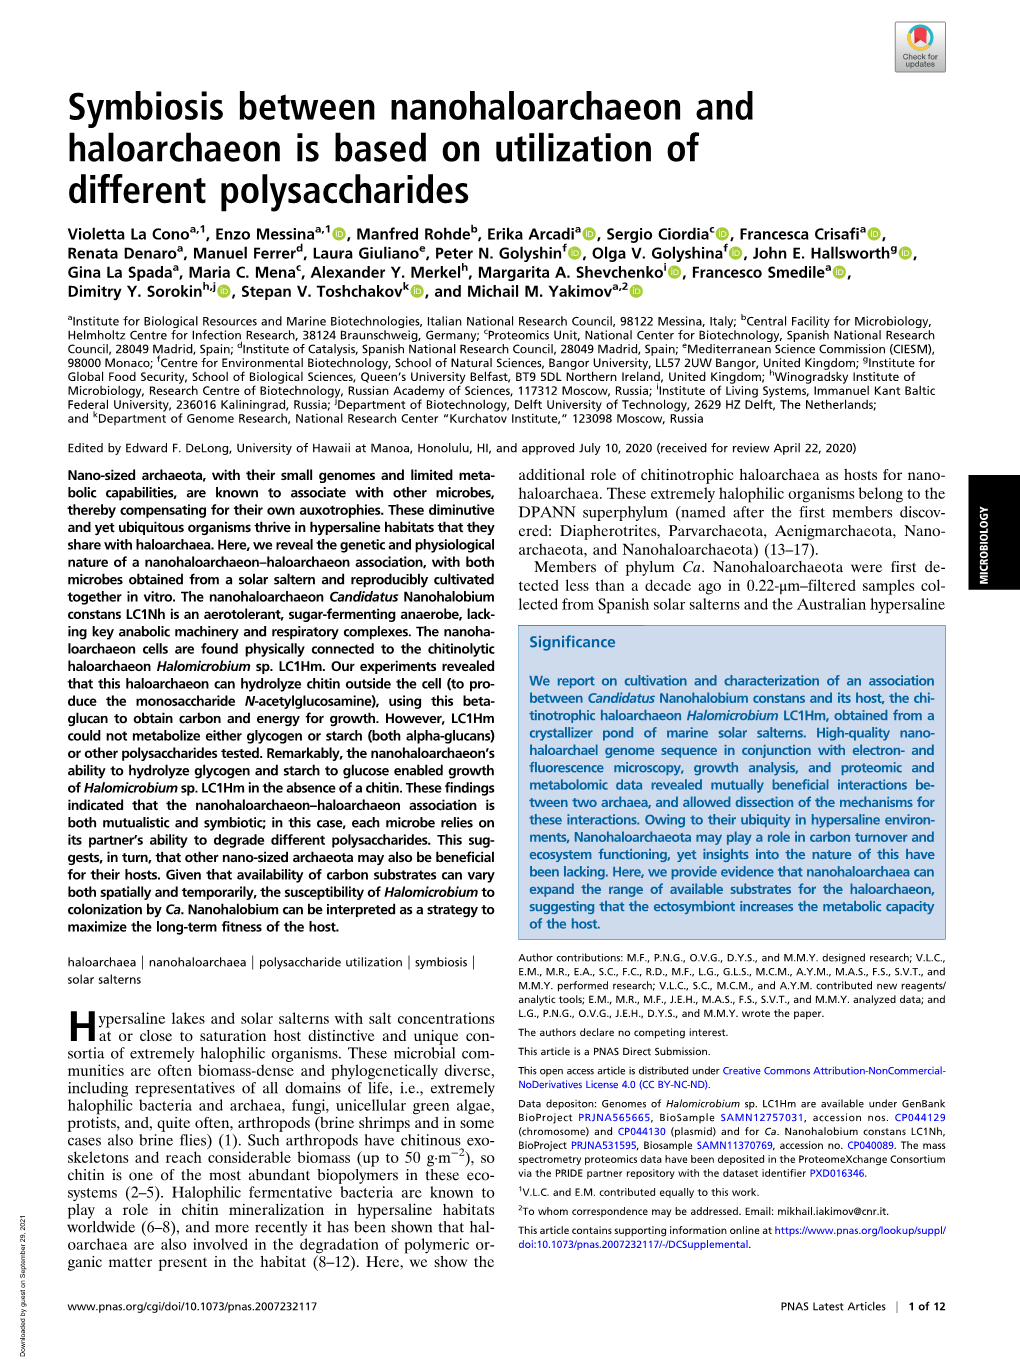 Symbiosis Between Nanohaloarchaeon and Haloarchaeon Is Based on Utilization of Different Polysaccharides